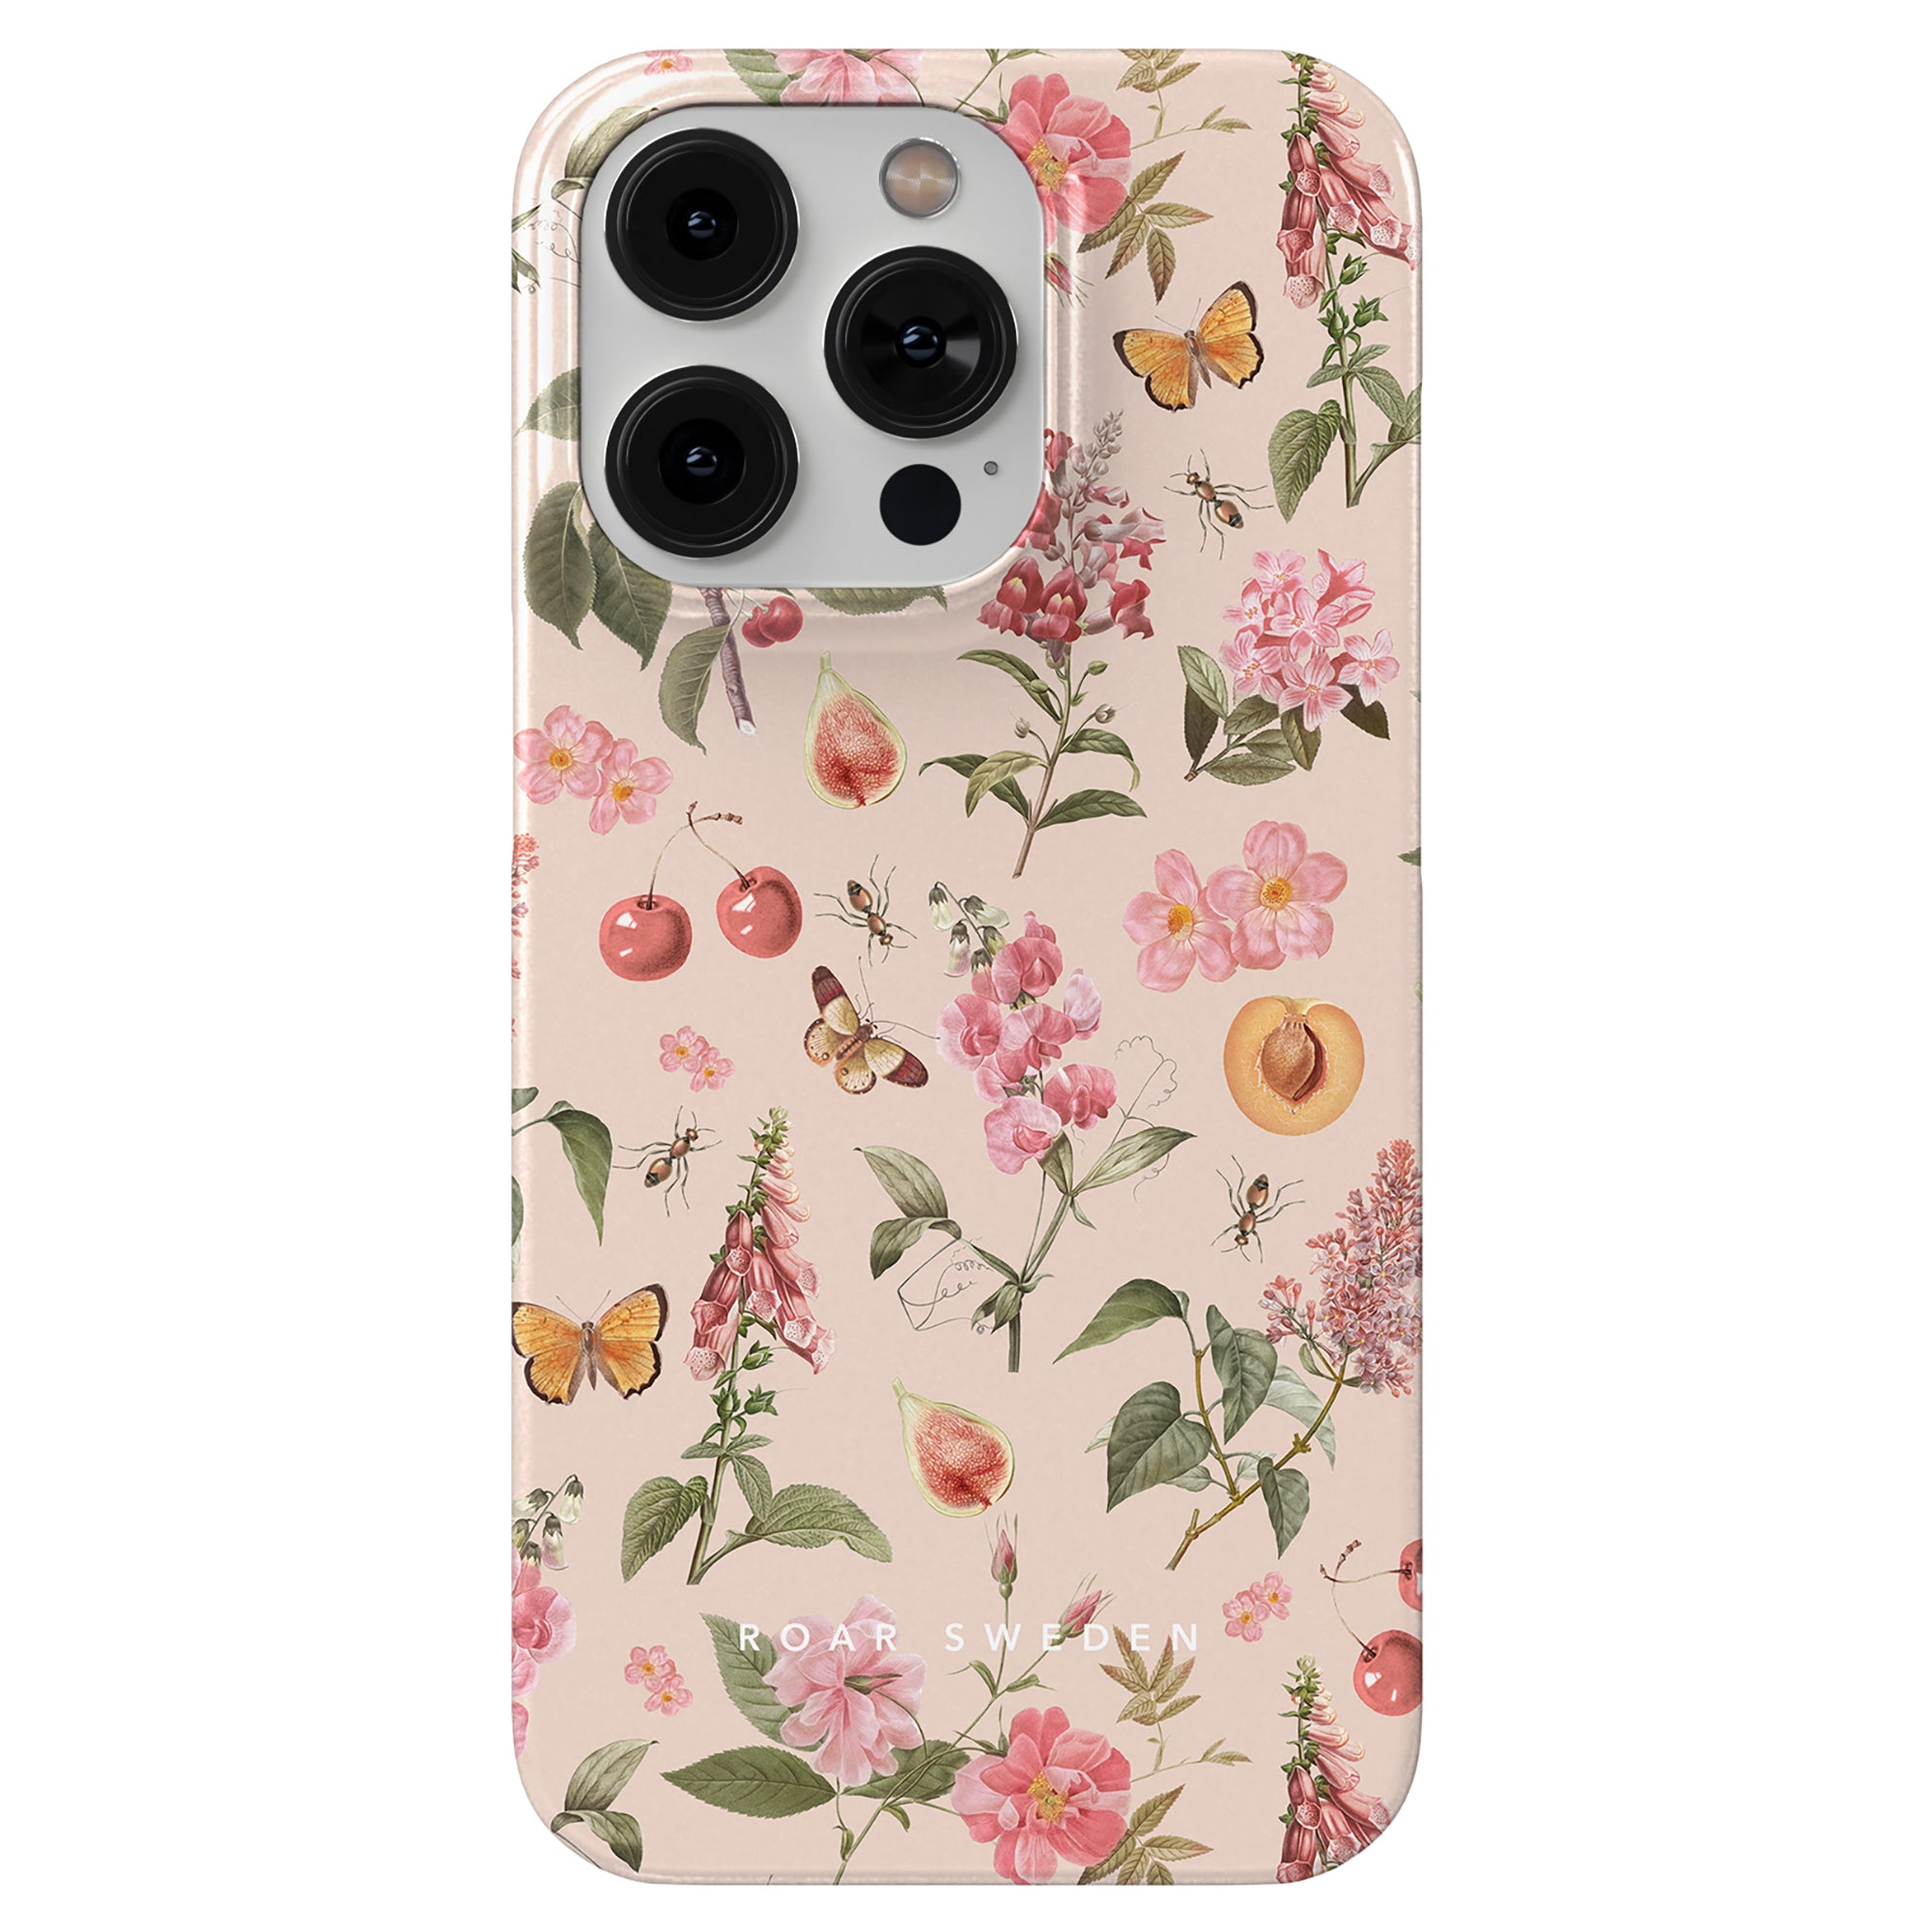 Romantic Spring - Slim case with camera cutouts, an ideal product description keyword for enhancing SEO.